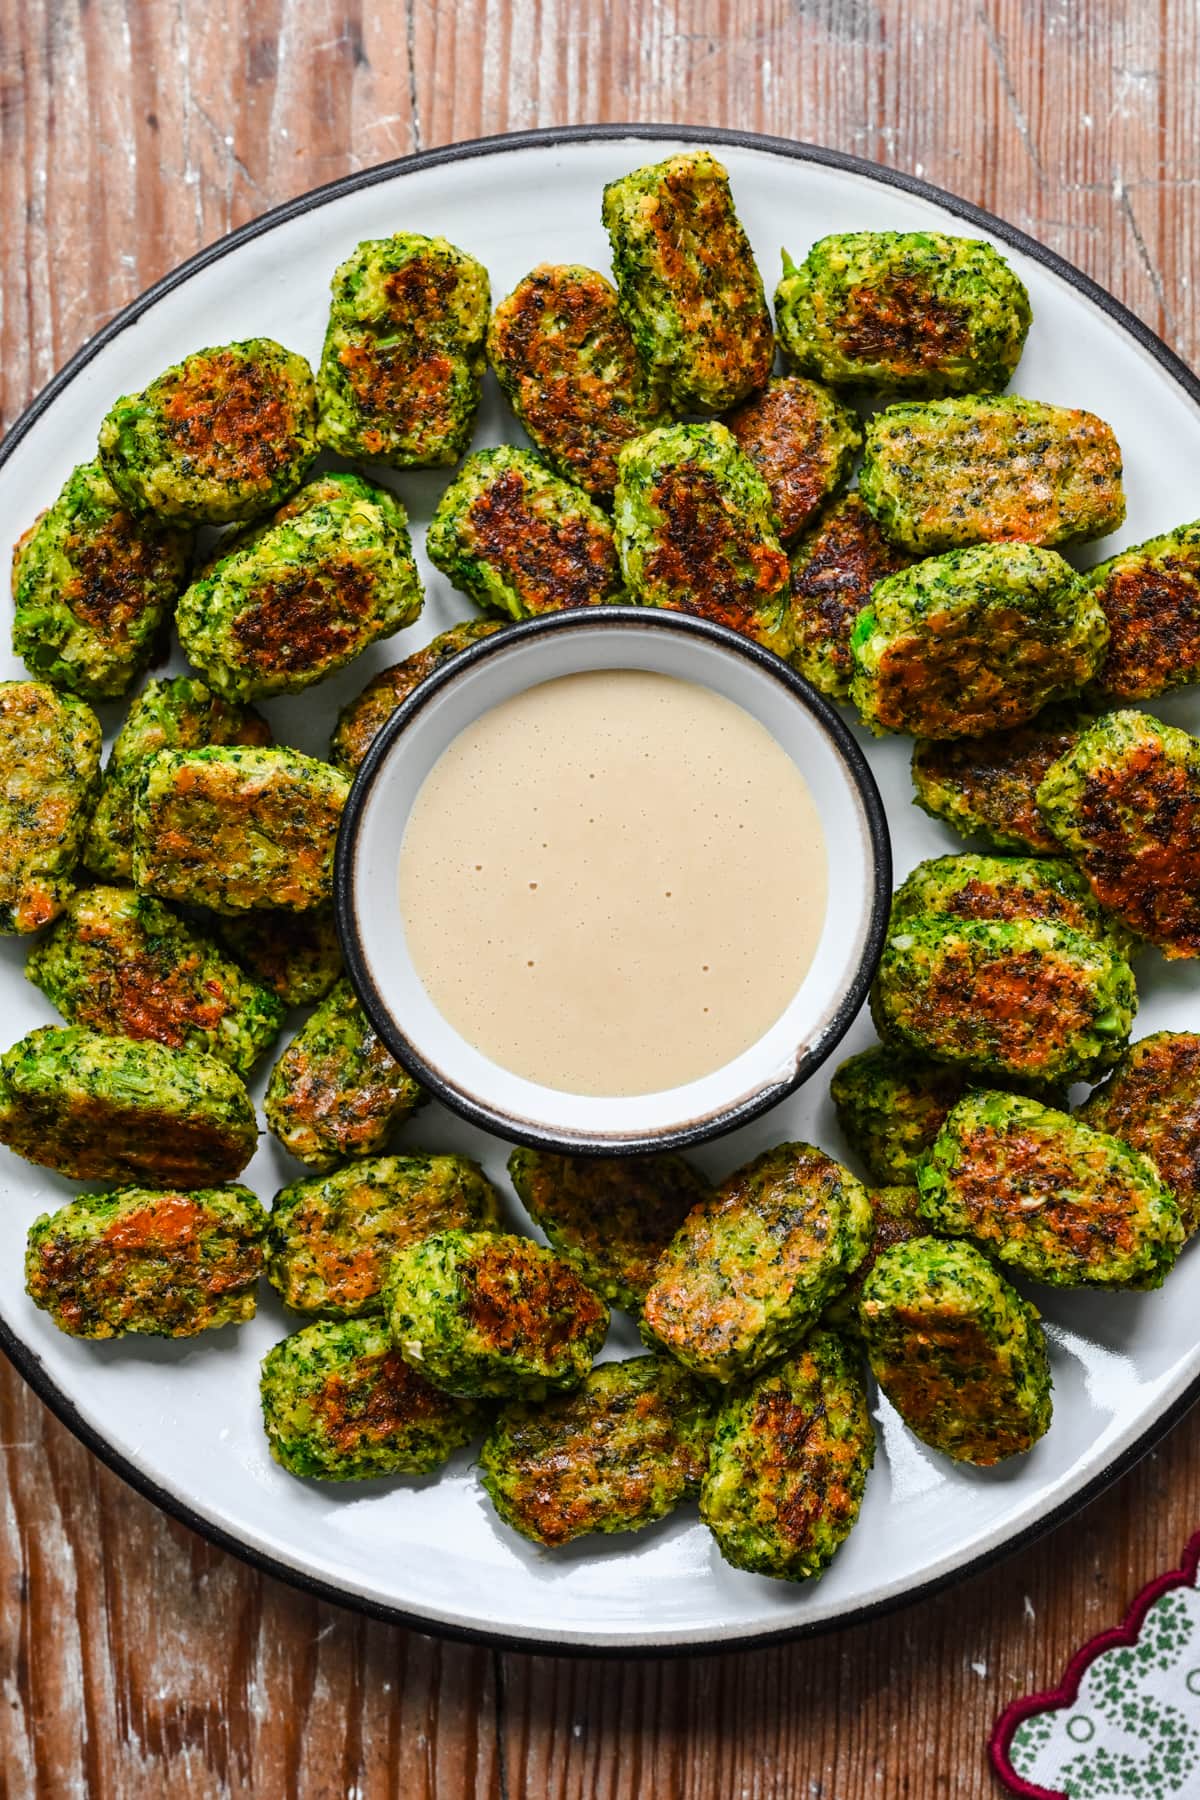 Overhead view of broccoli tots surrounded by honey mustard.